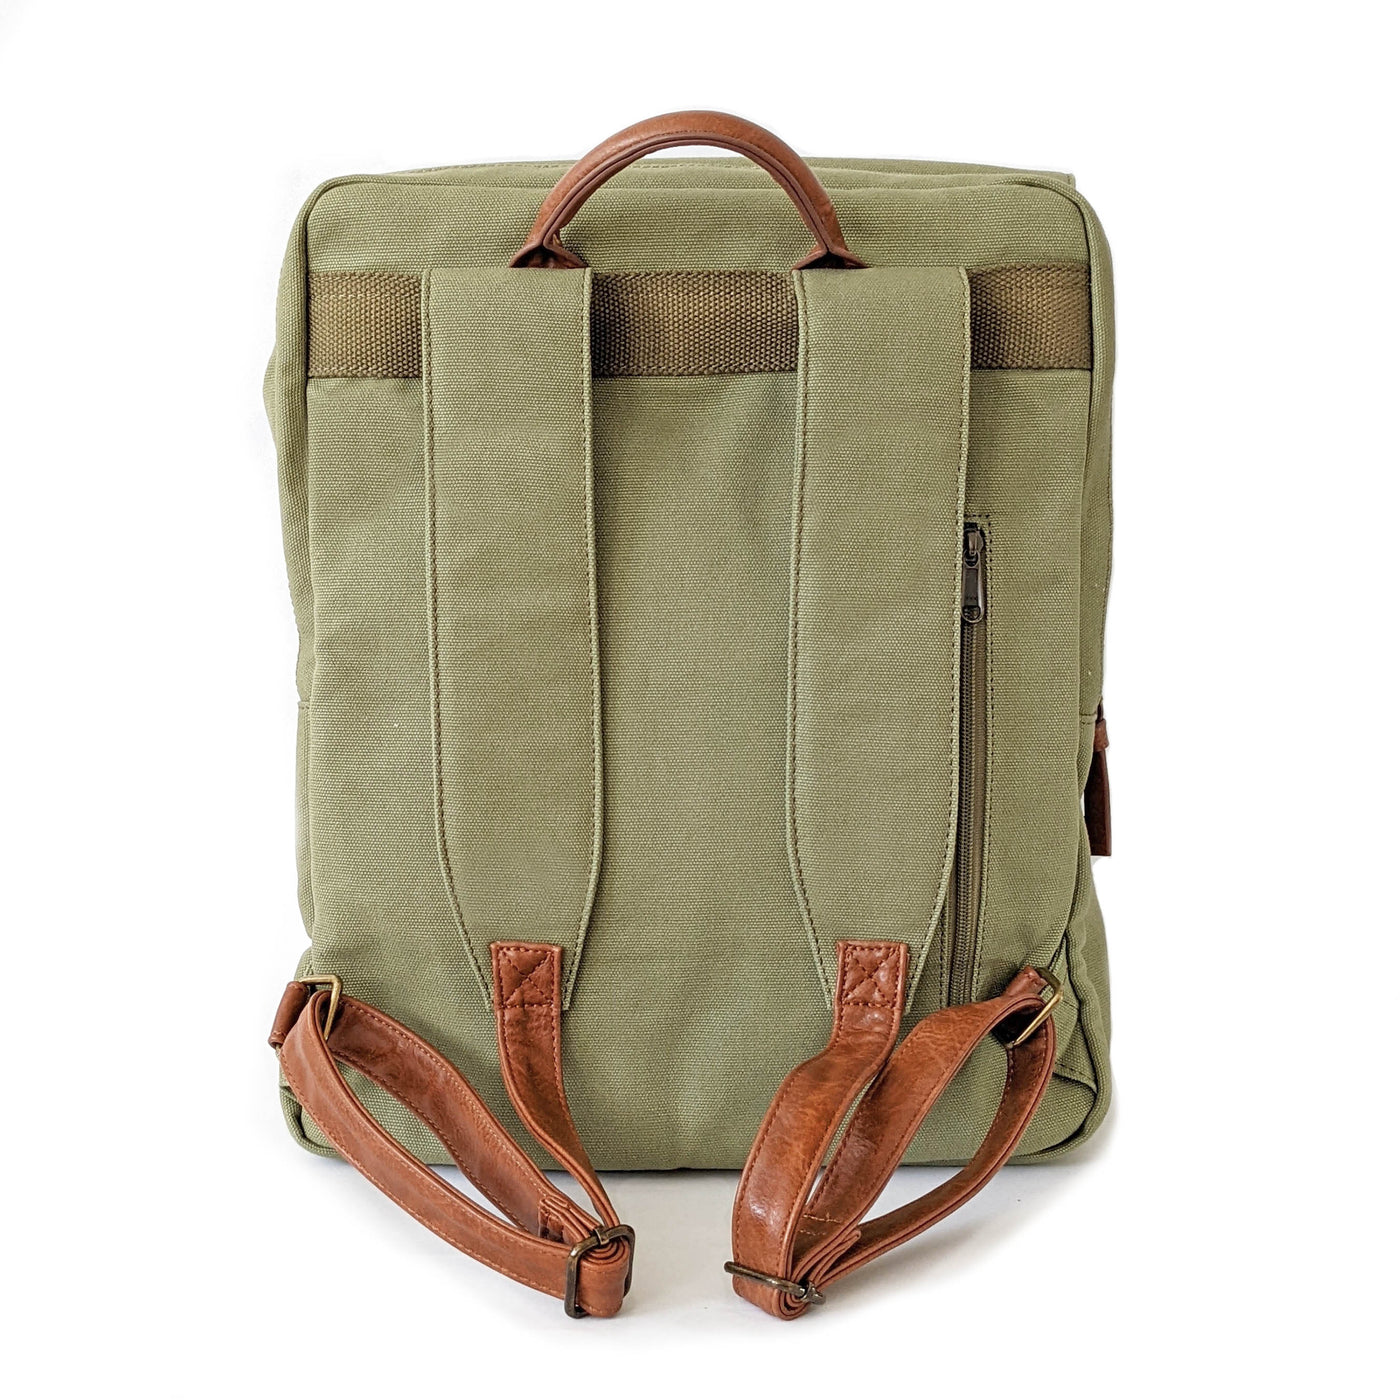 A laurel green colored canvas backpack with caramel brown vegan leather accents, shown in a rear view on a white background.